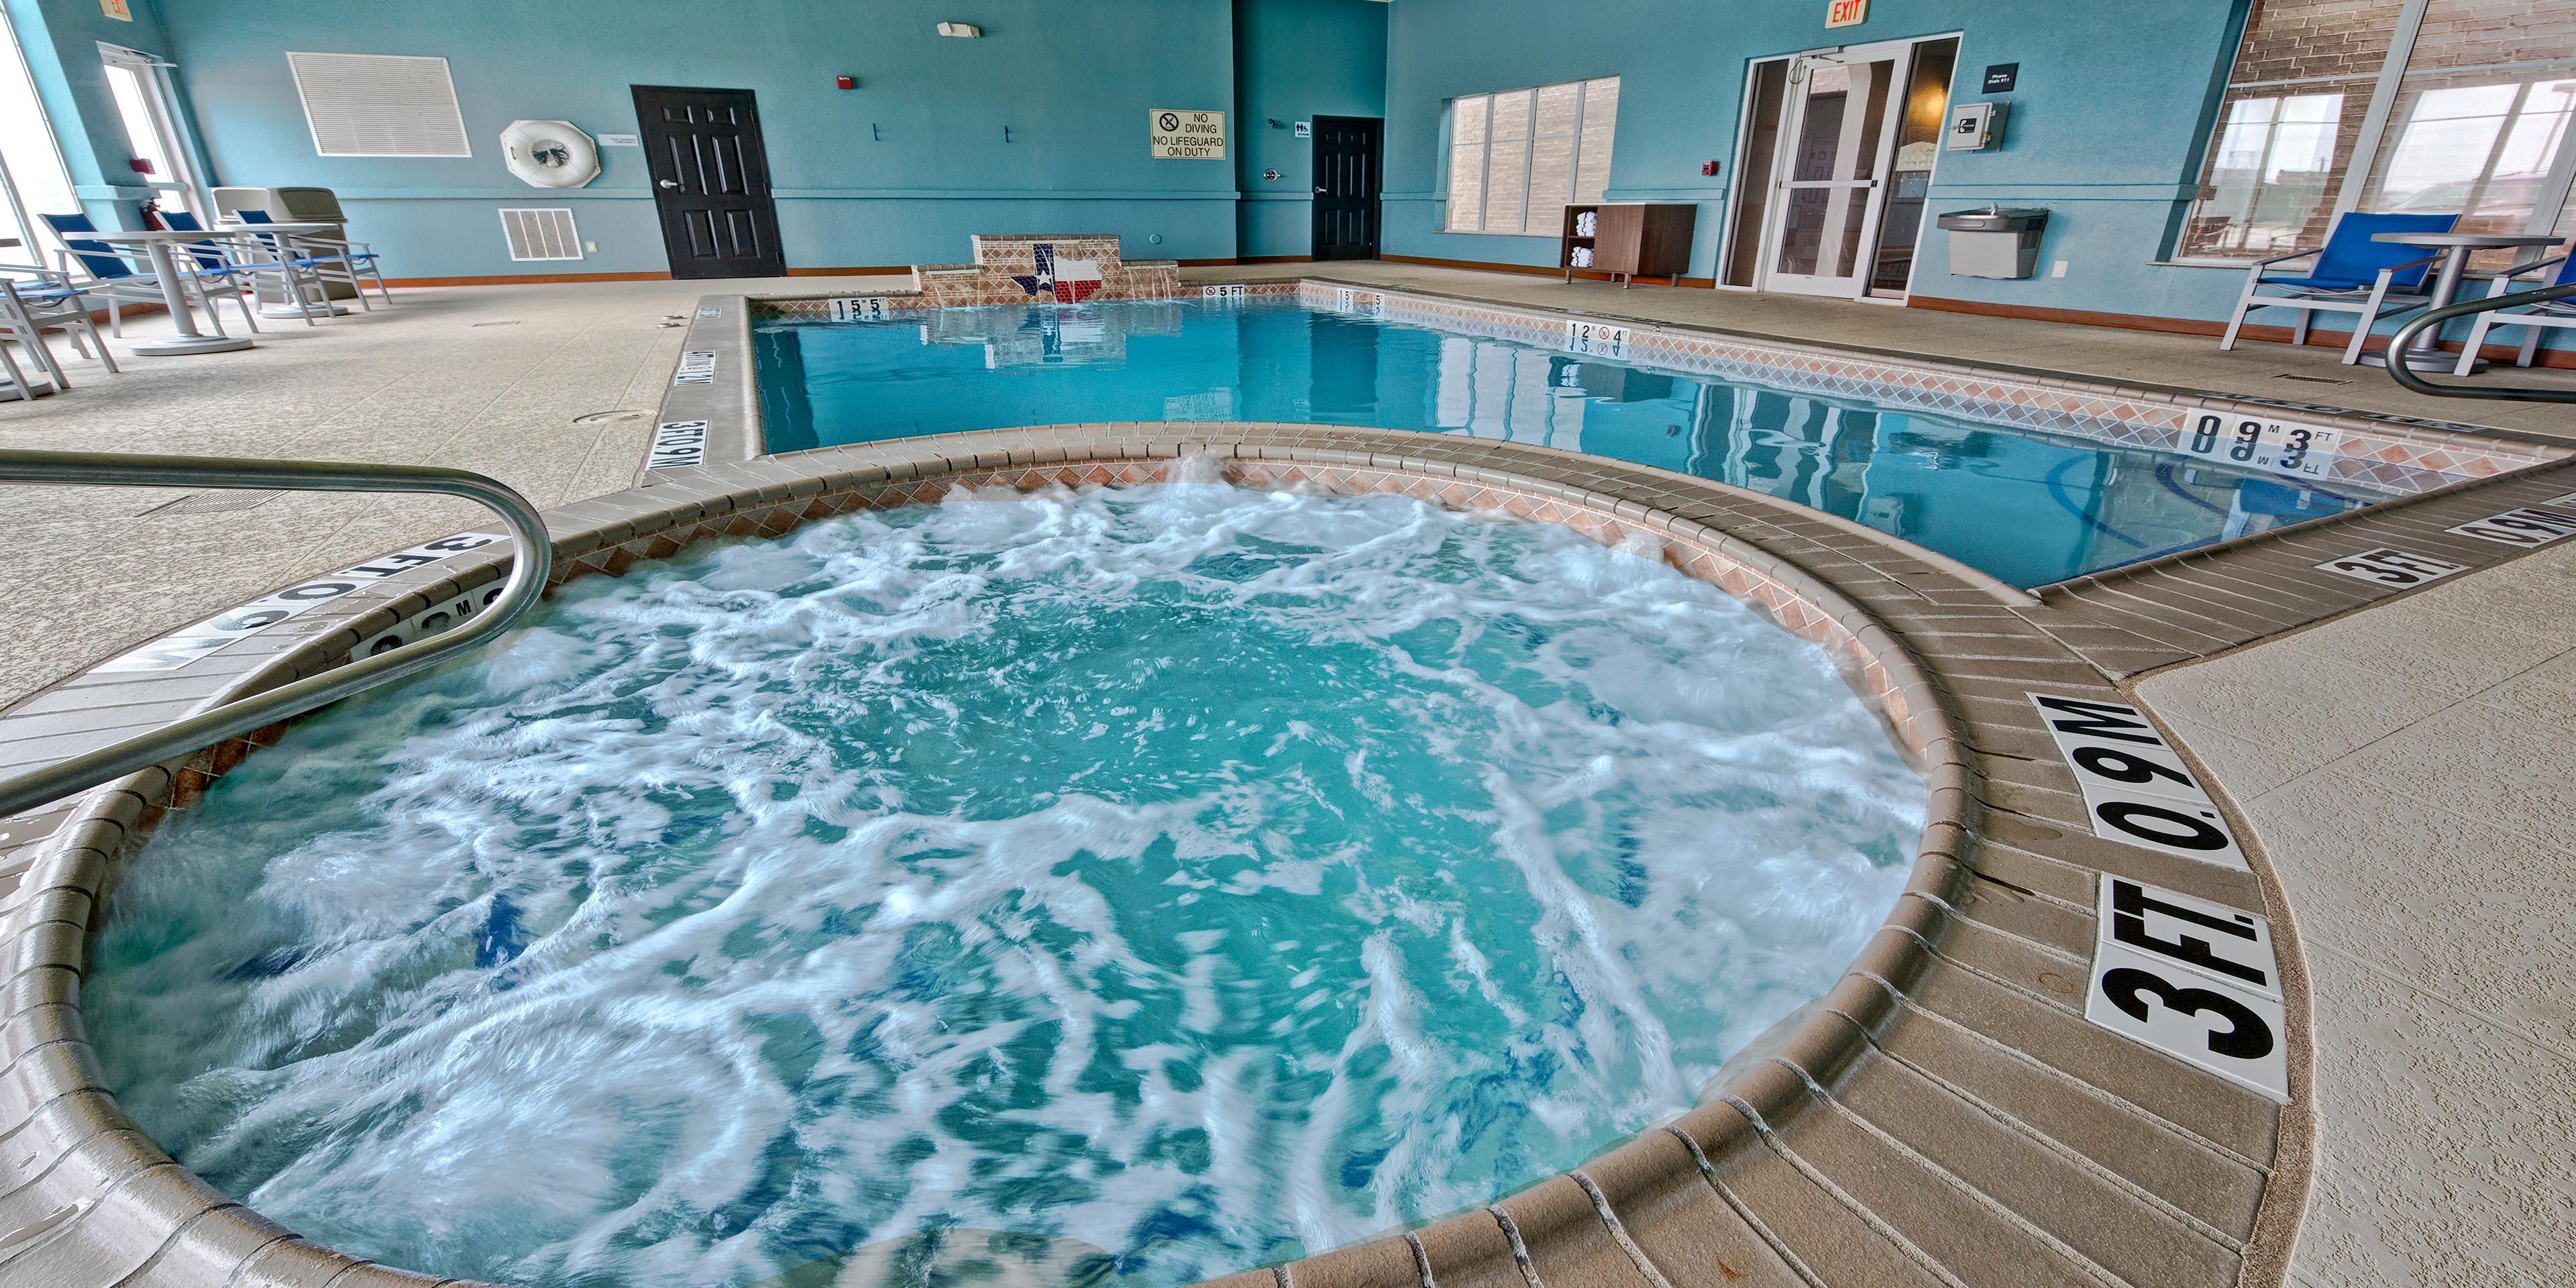 Enjoy a relaxing swim in our indoor pool. Also, take some time to lounge in our adjoining hot tub.